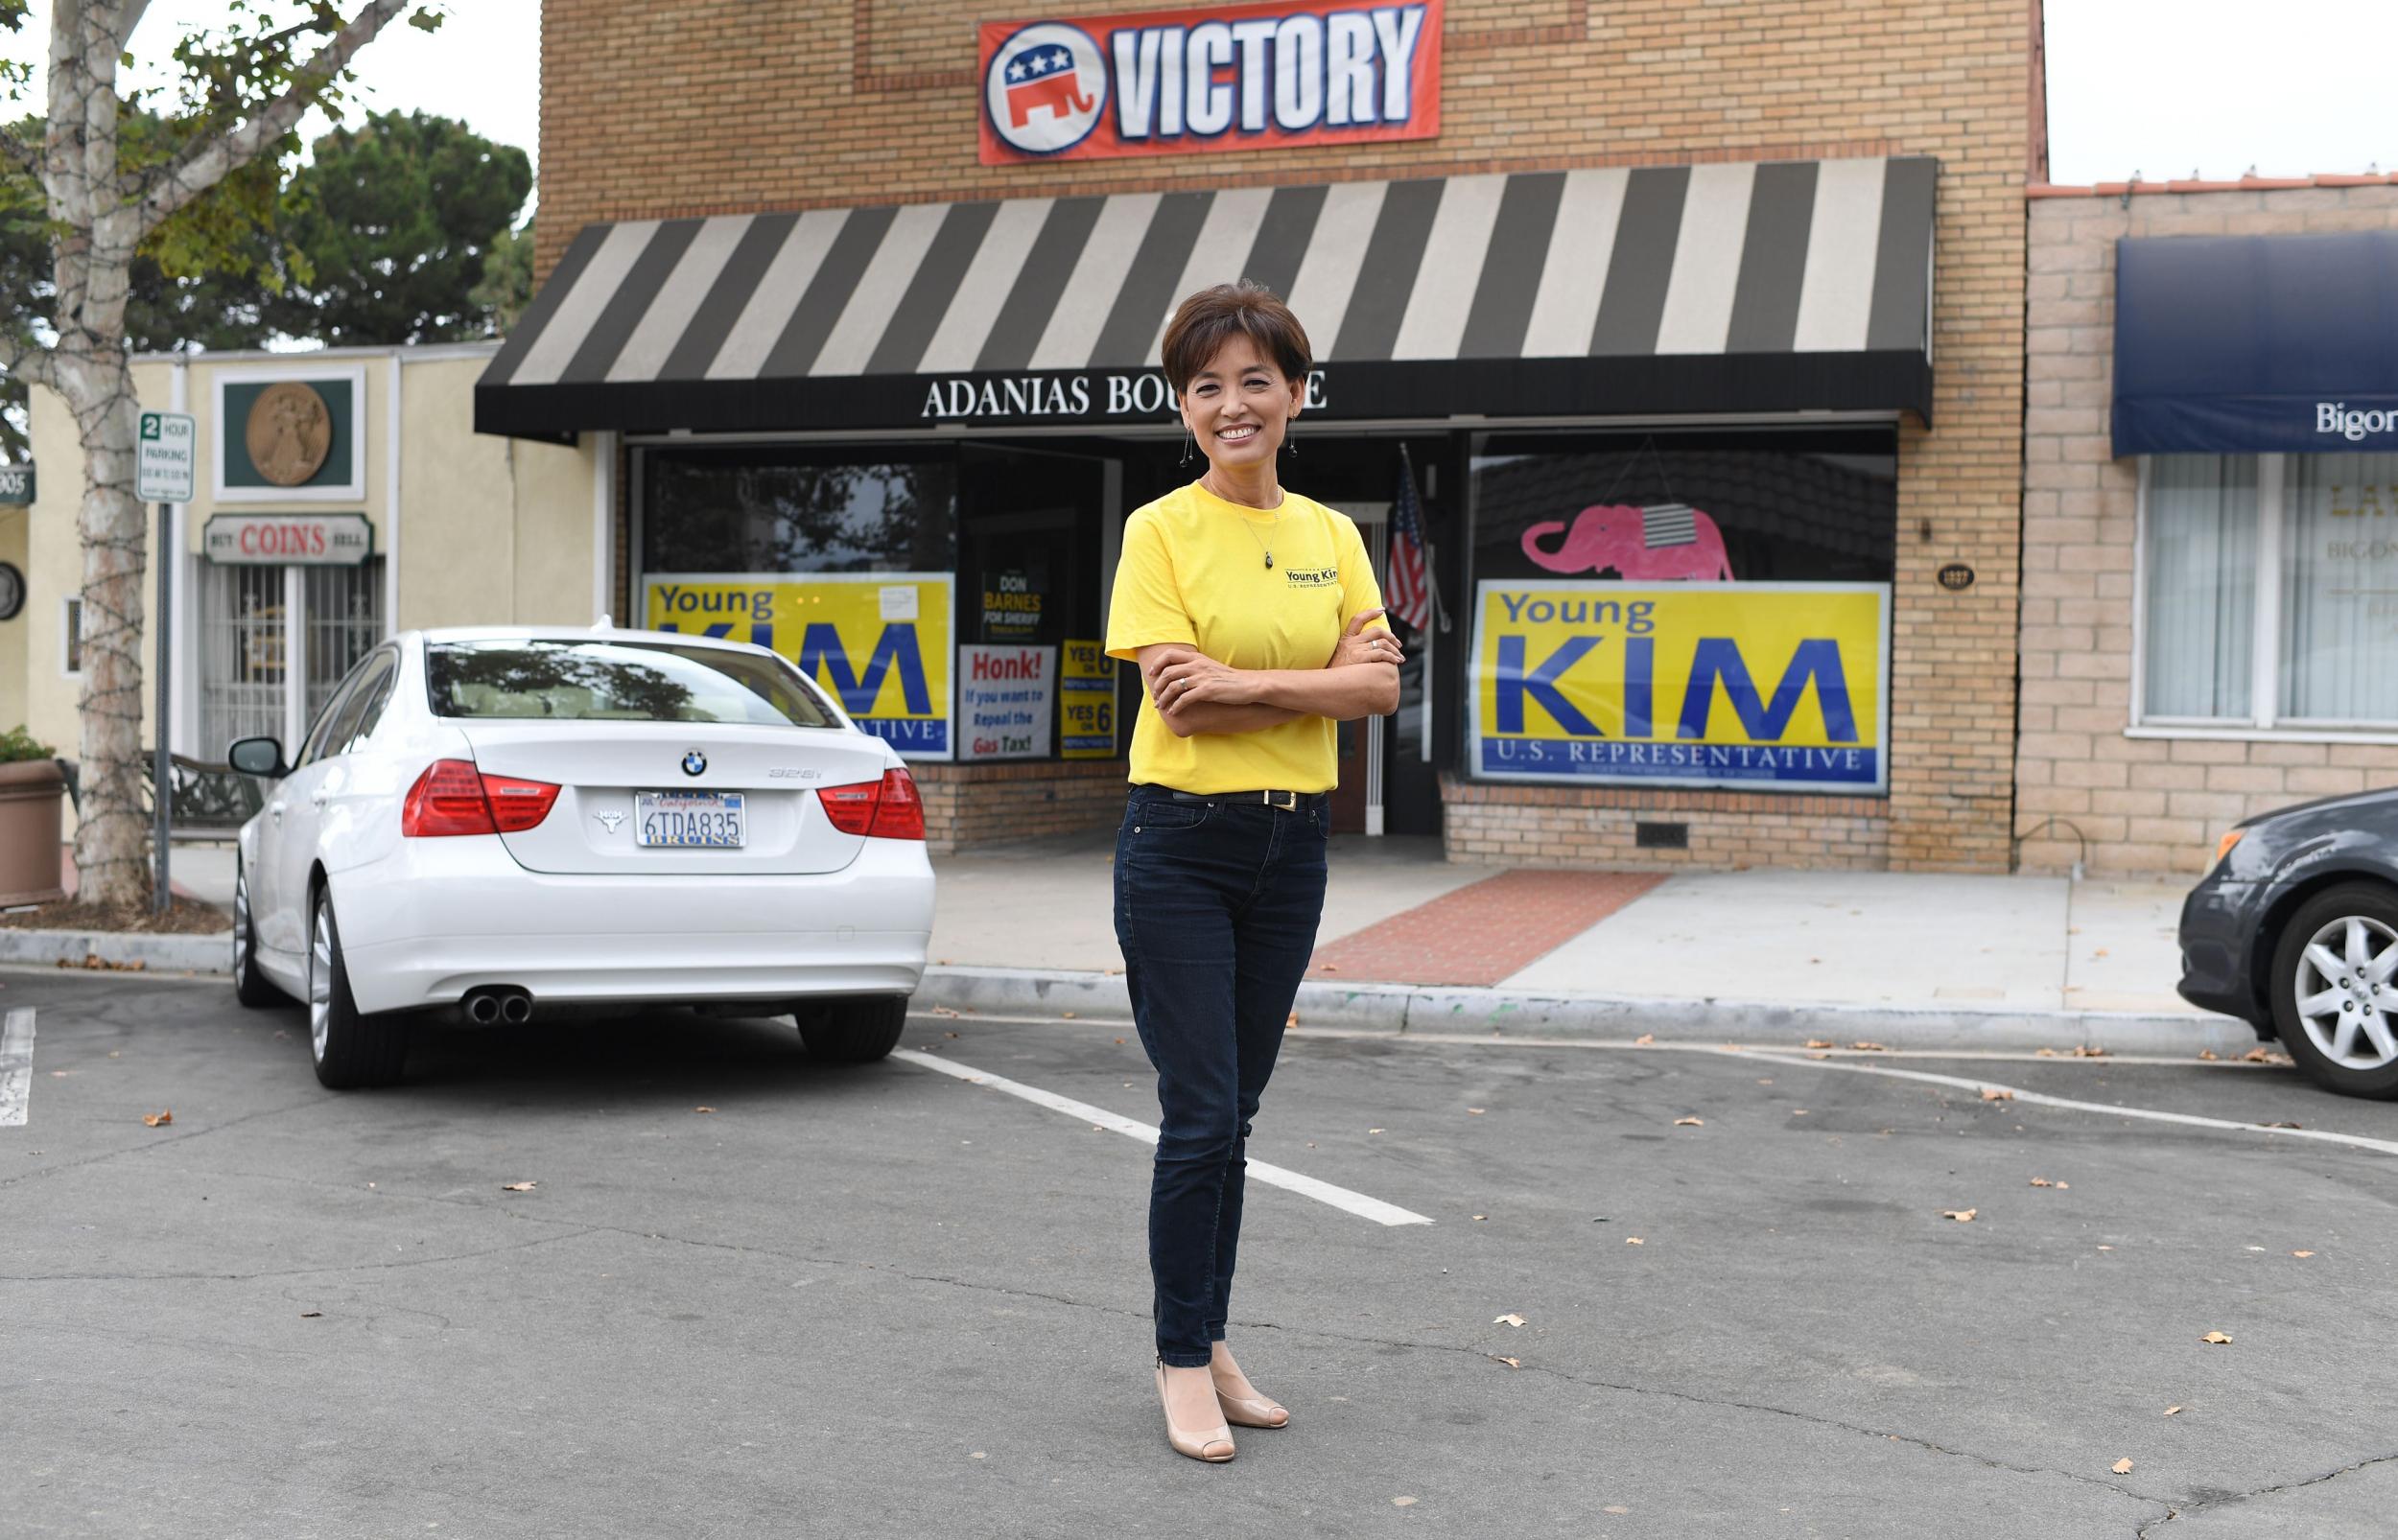 Republican candidate Young Kim would make history if elected